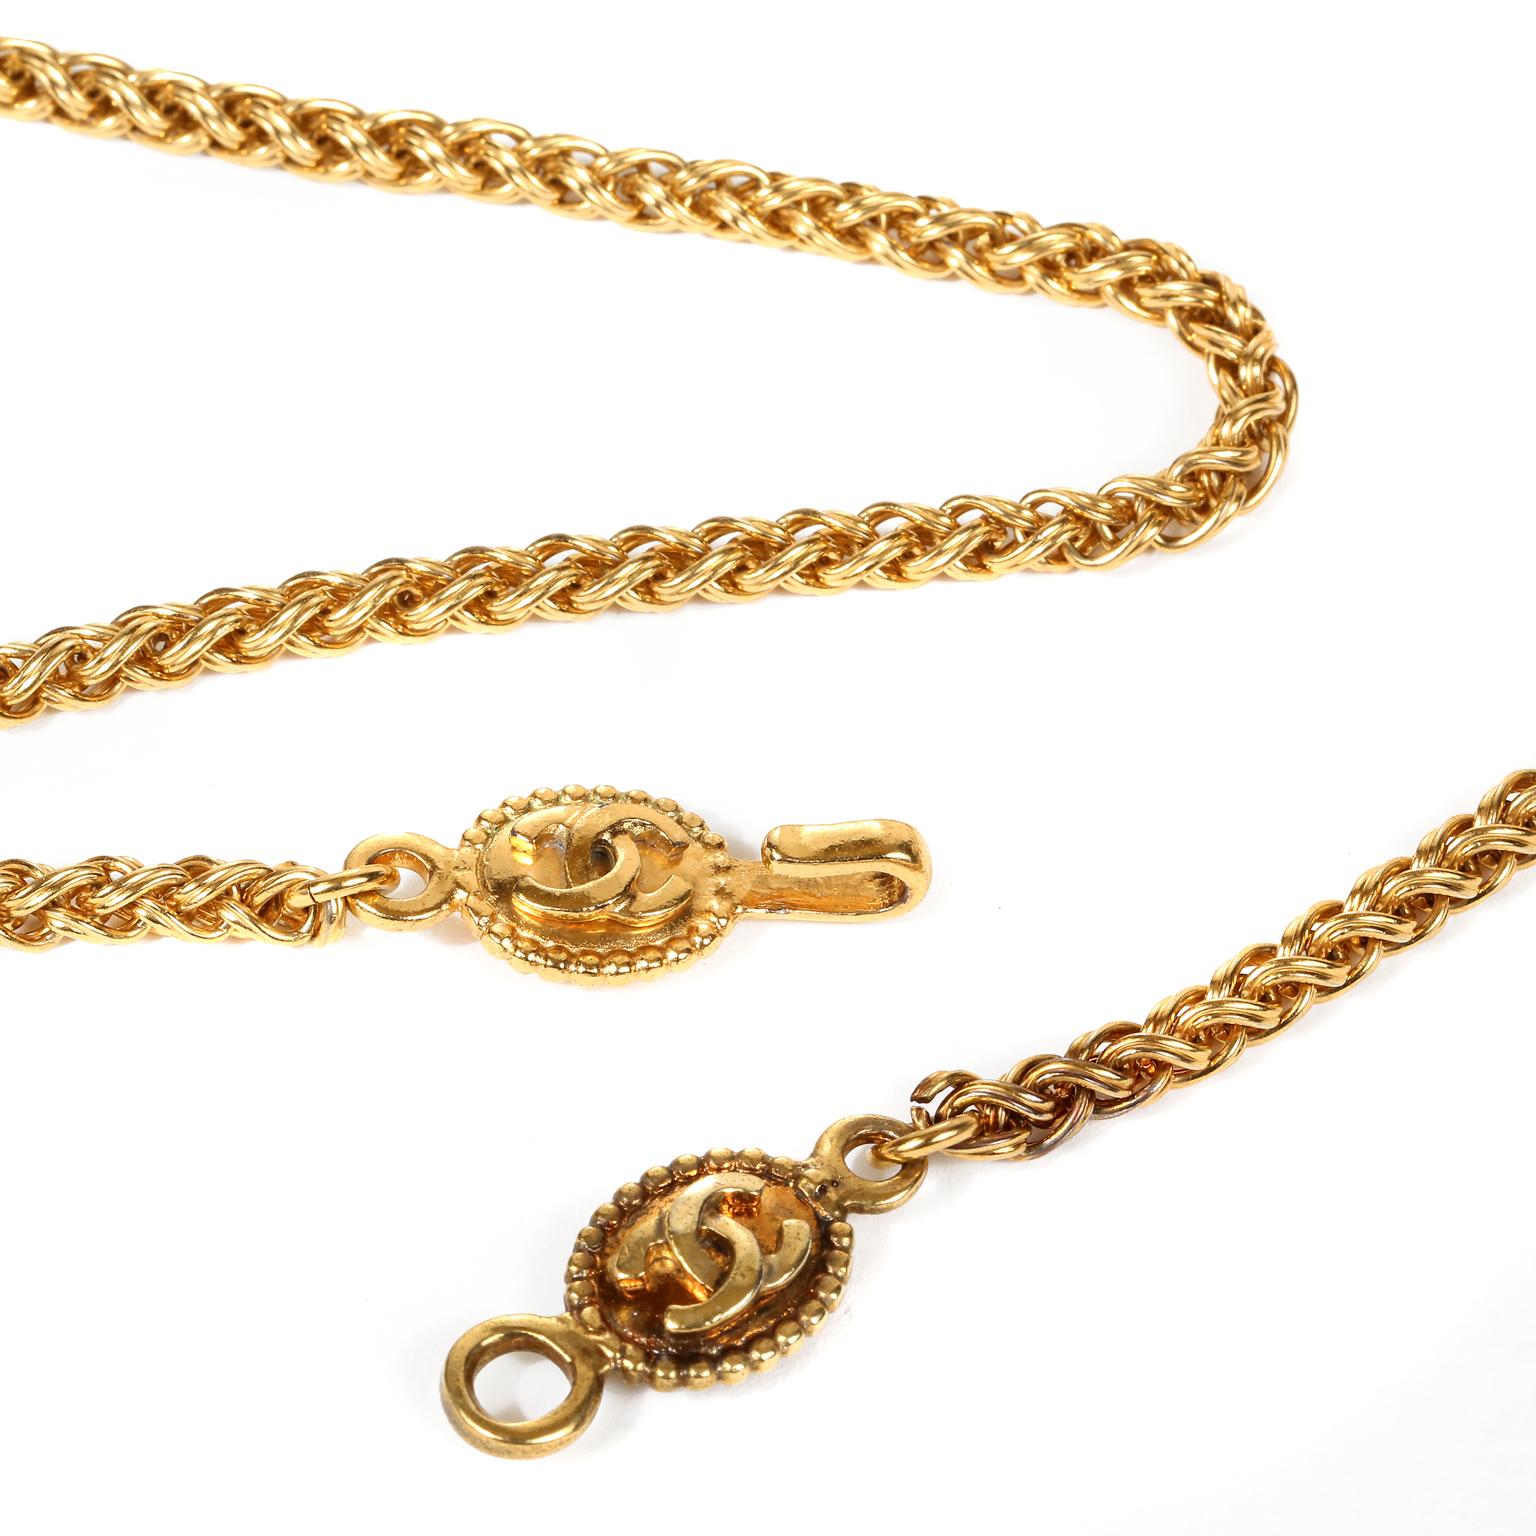 This authentic Chanel Gold CC Clover Medallion Necklace is in excellent condition from the mid 1990’s.   A large gold tone clover shaped medallion is adorned with interlocking CC logos.  Suspended from a substantial long gold wheat style chain. 